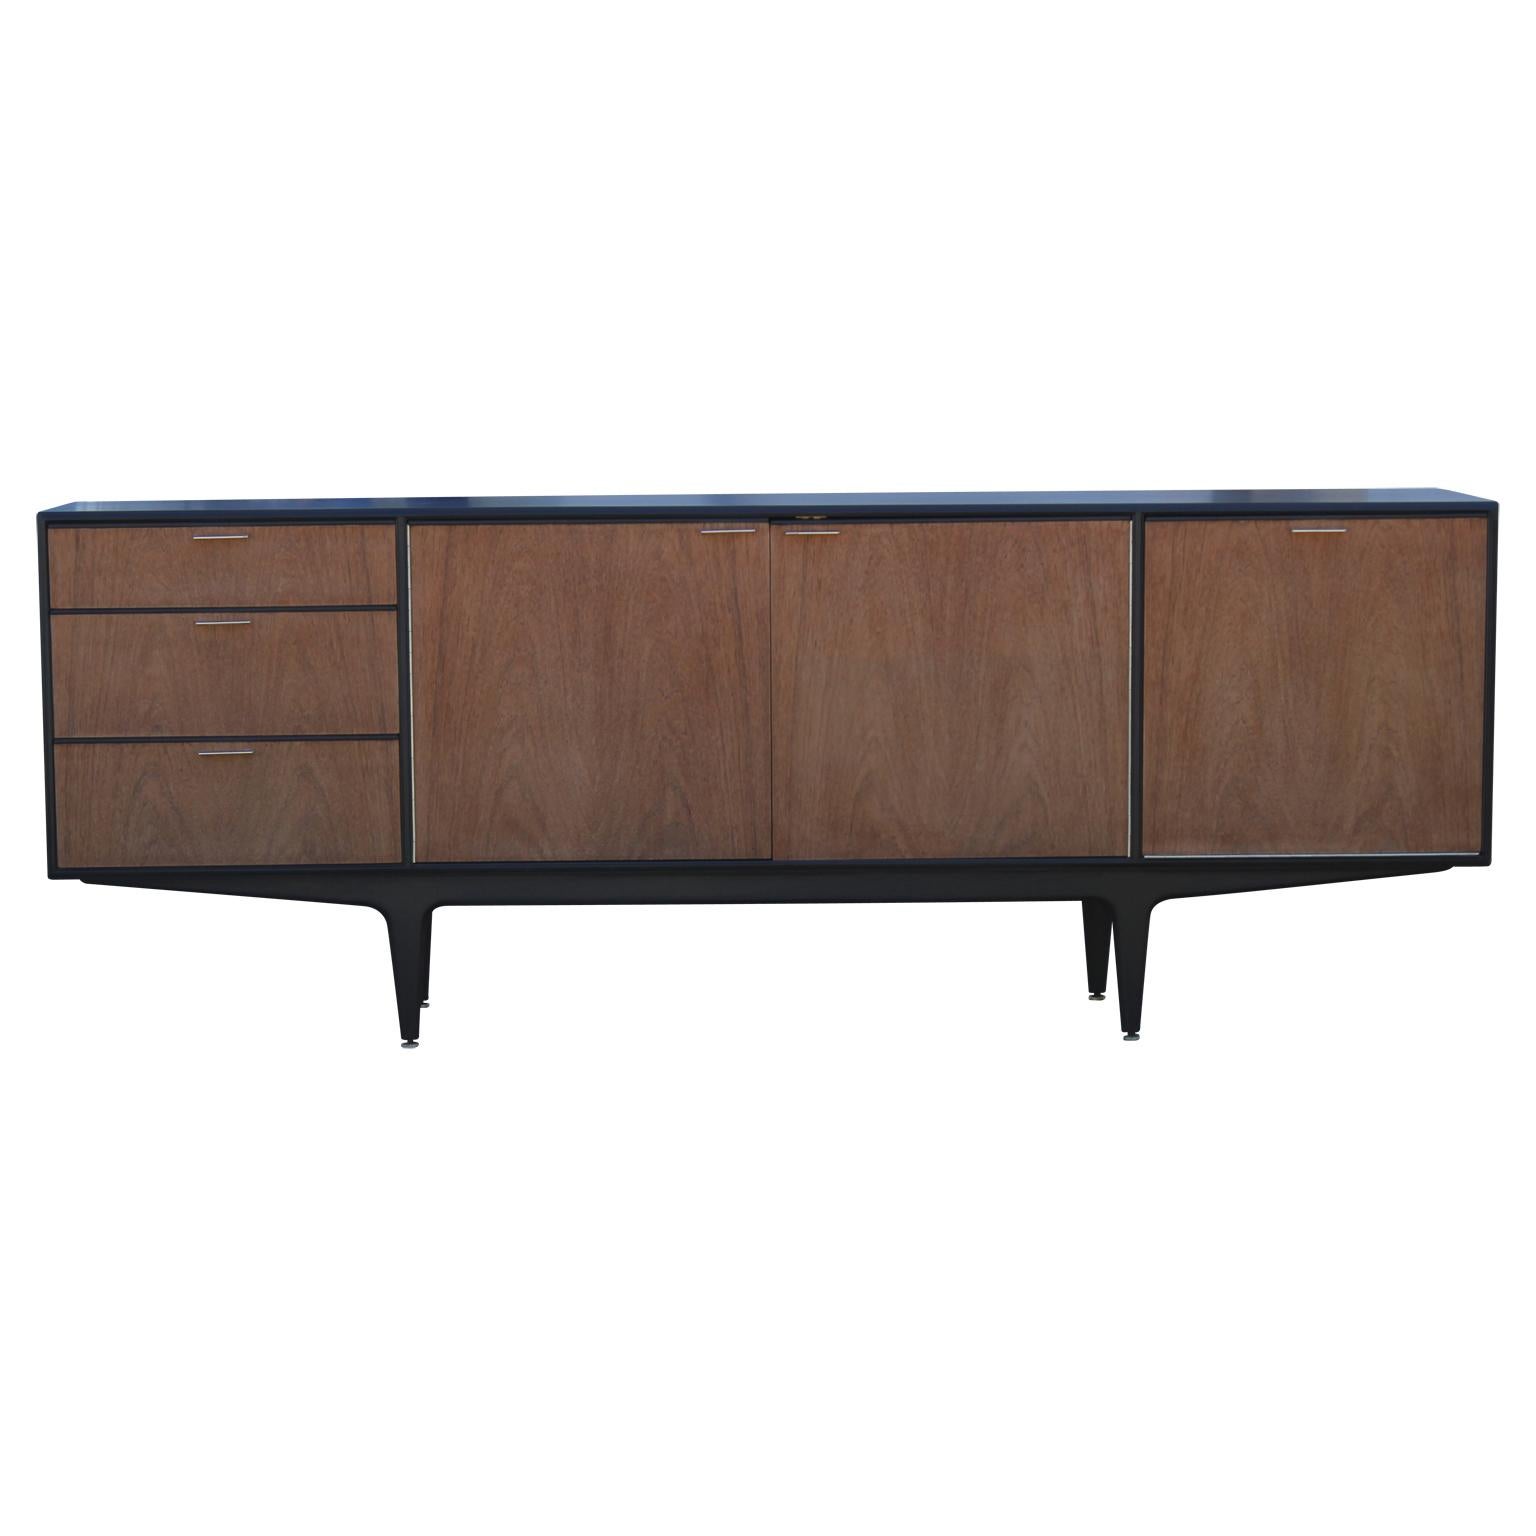 Sleek and modern two-tone teak sideboard or credenza. Would be a beautiful addition to any room.